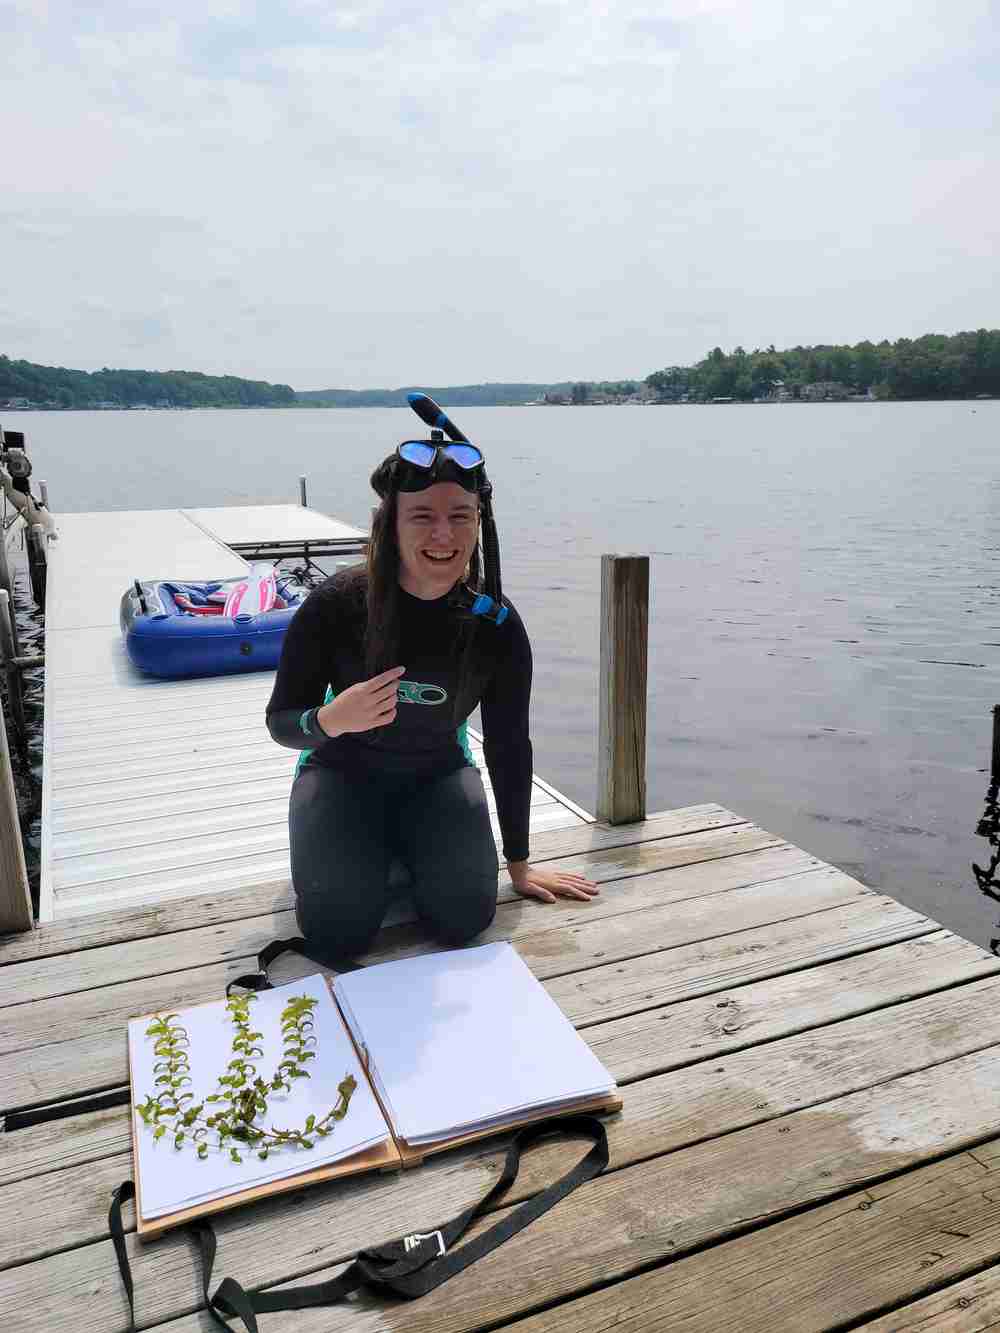 Emily Neuman defends thesis on growth and habitat suitability of invasive starry stonewort